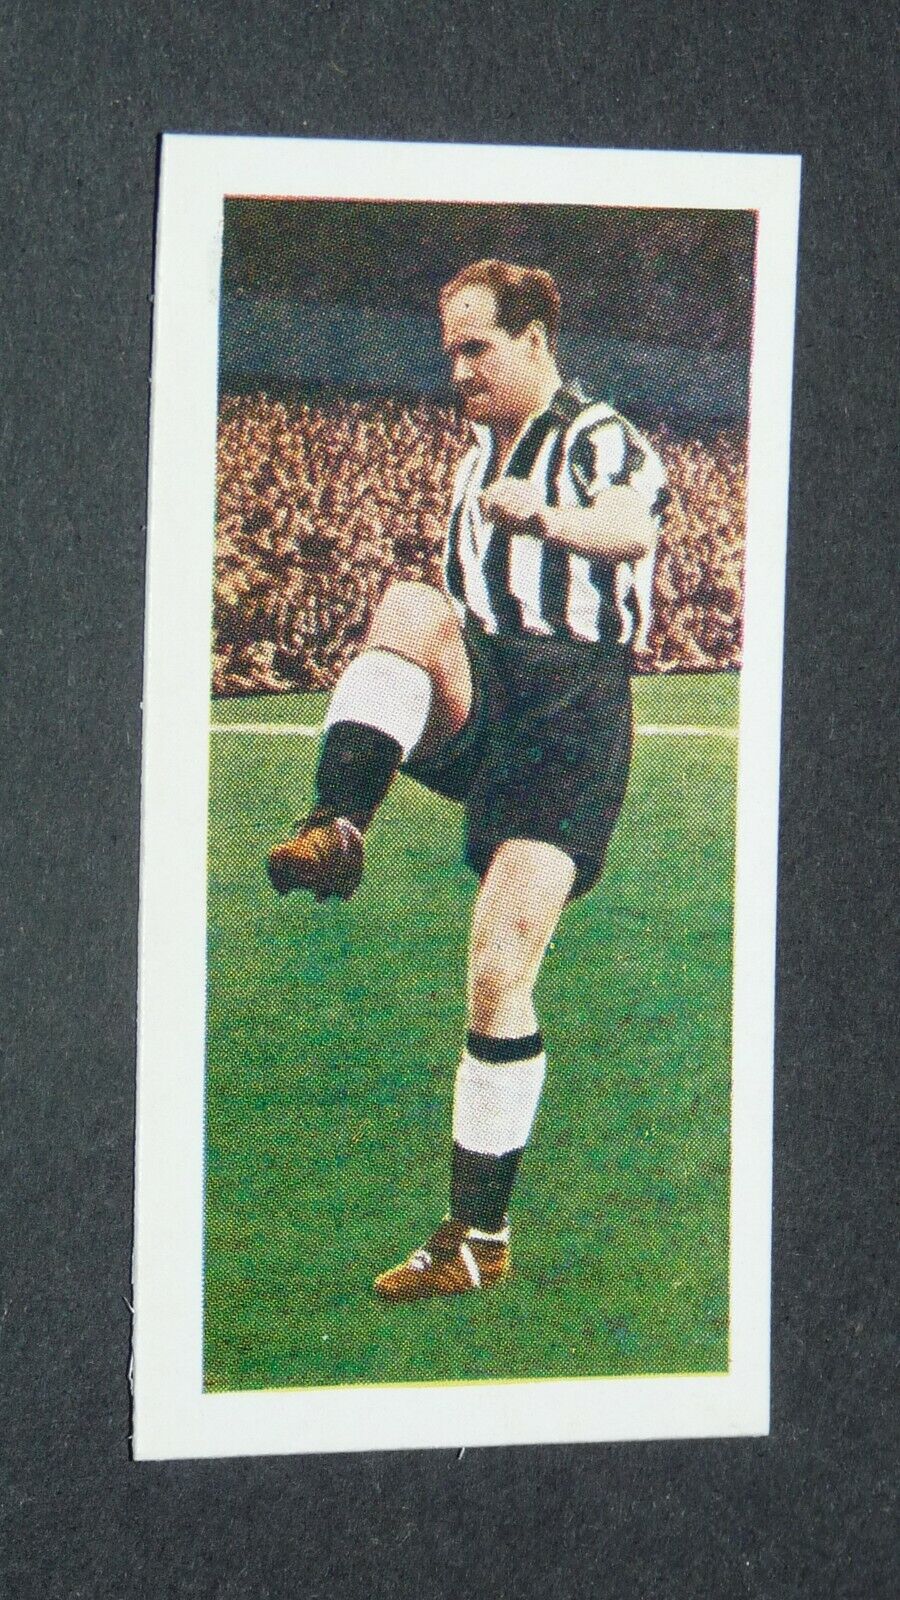 1957 FOOTBALL CADET SWEETS CARD #21 JIMMY SCOULAR NEWCASTLE UTD MAGPIES SCOTLAND